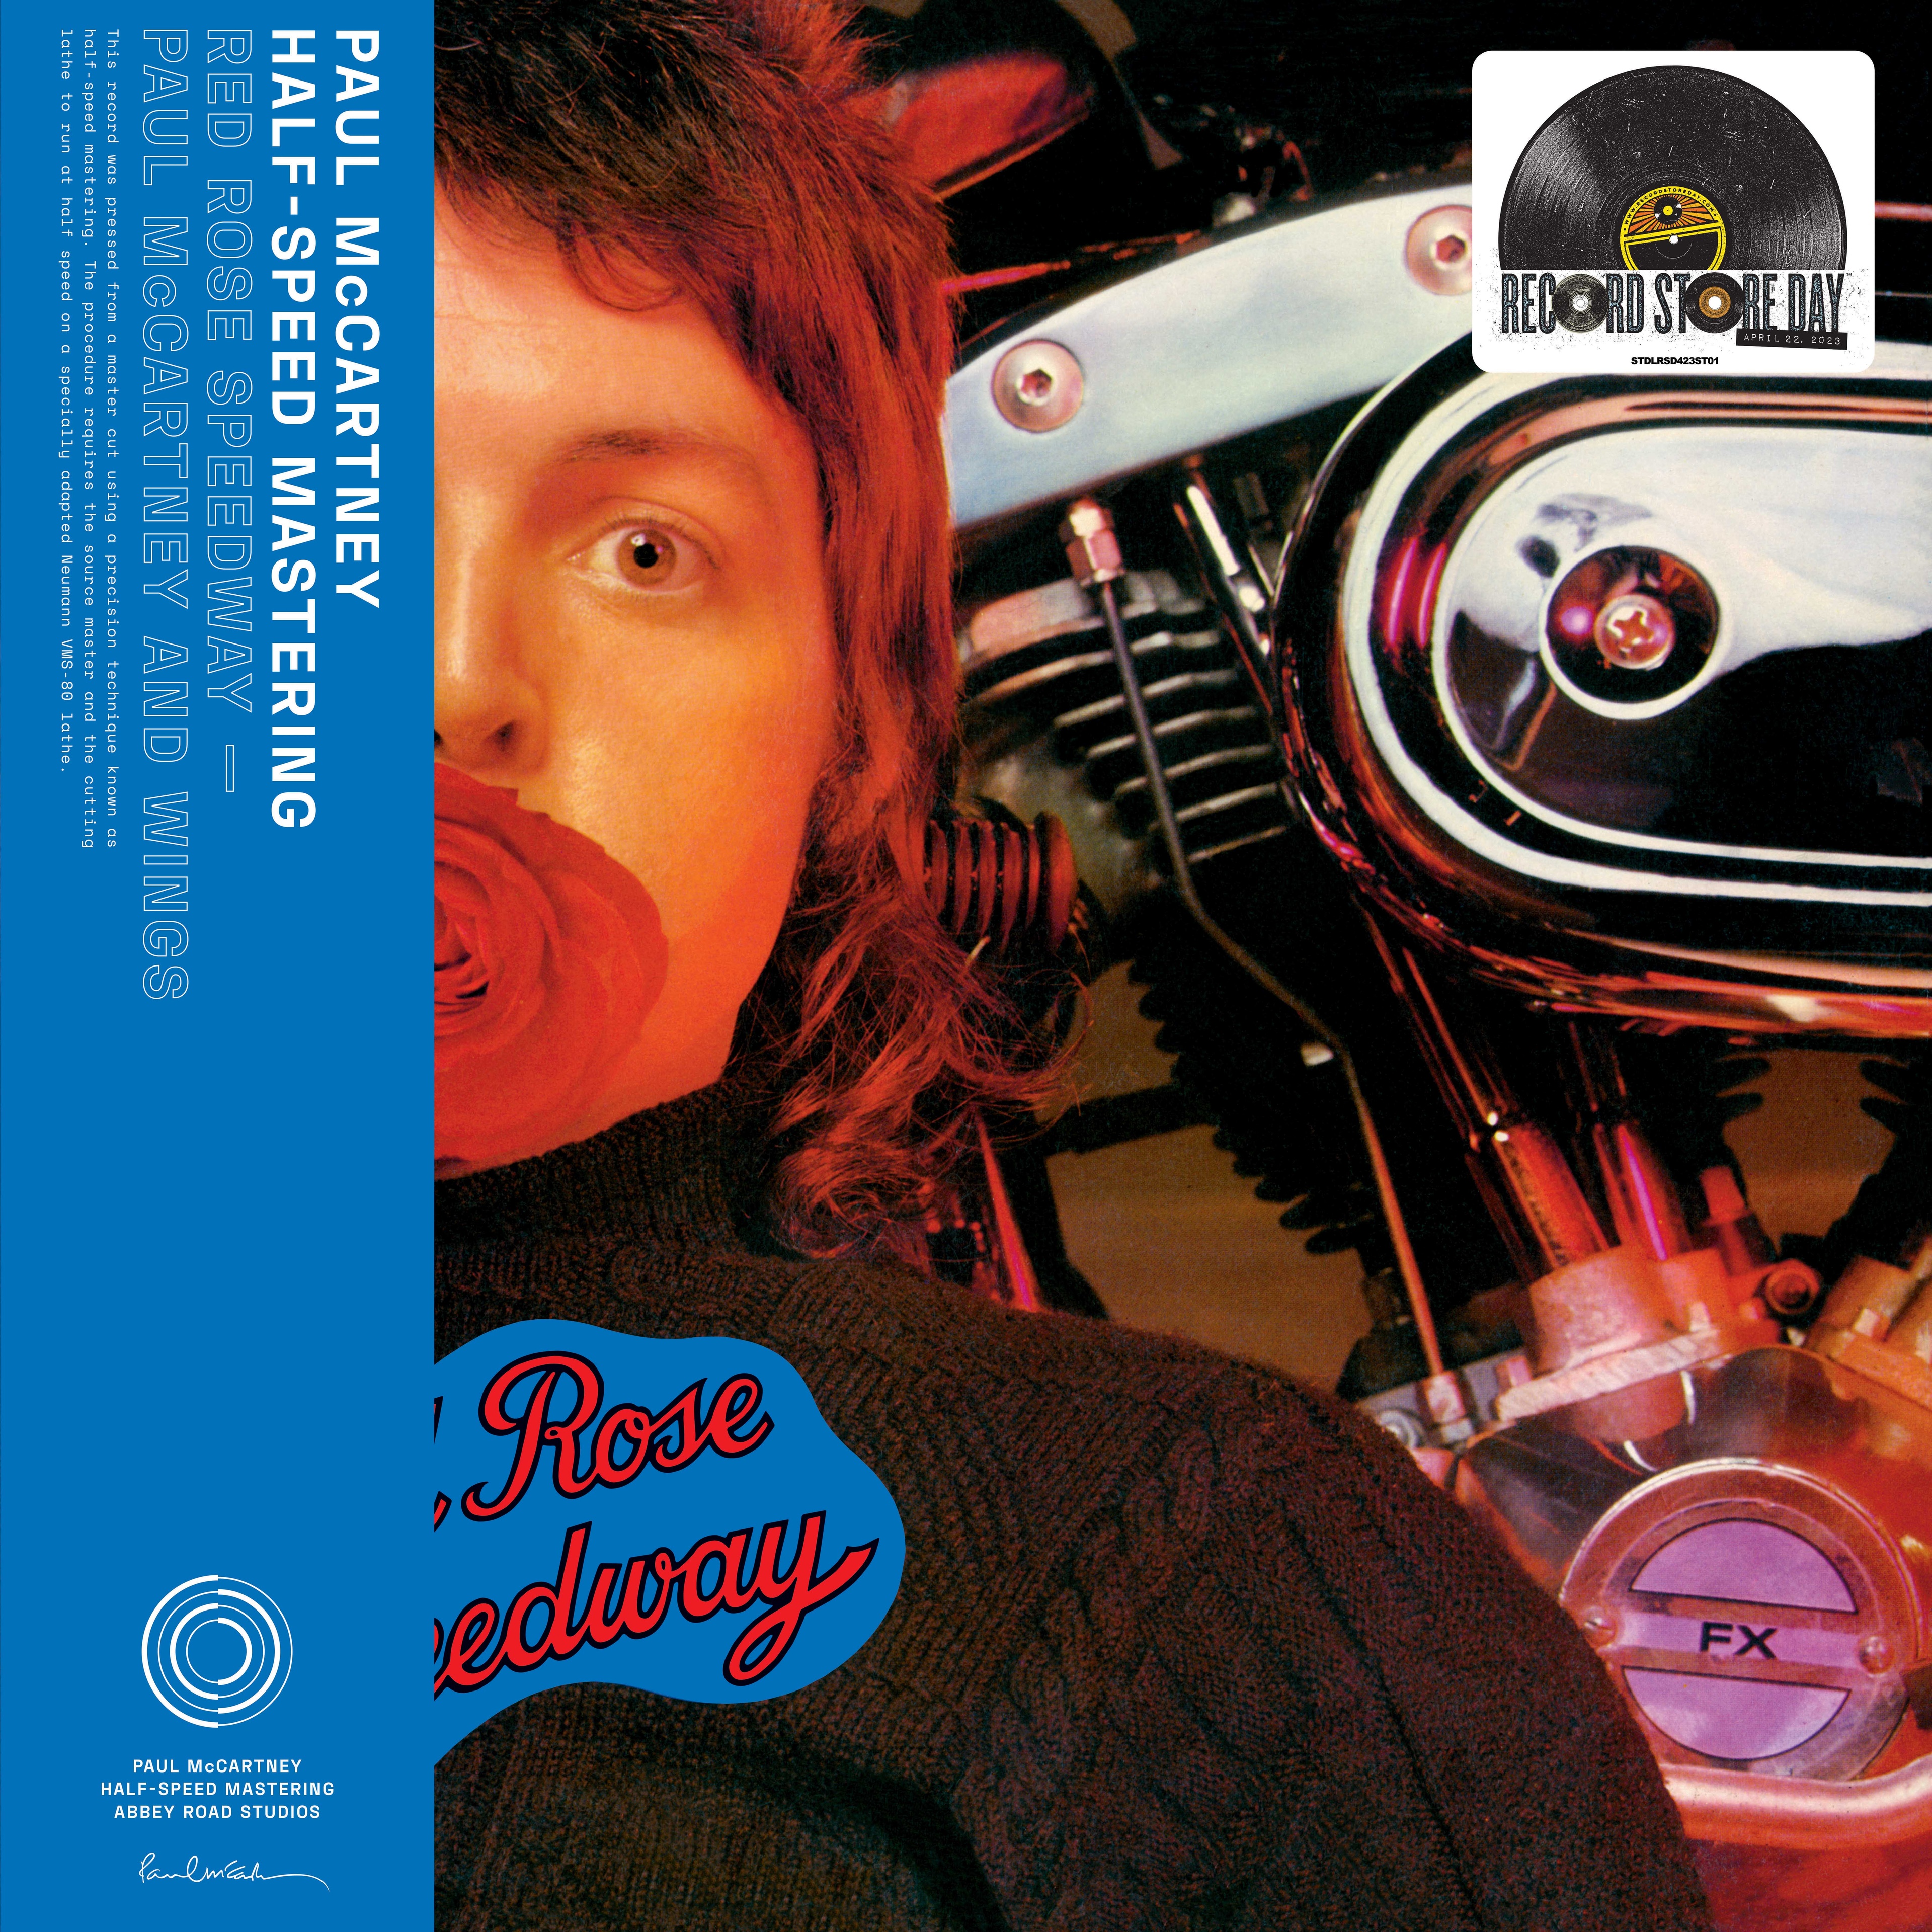 Cover art for 'Red Rose Speedway' 50th Anniversary vinyl, showing Paul with a rose in his mouth 